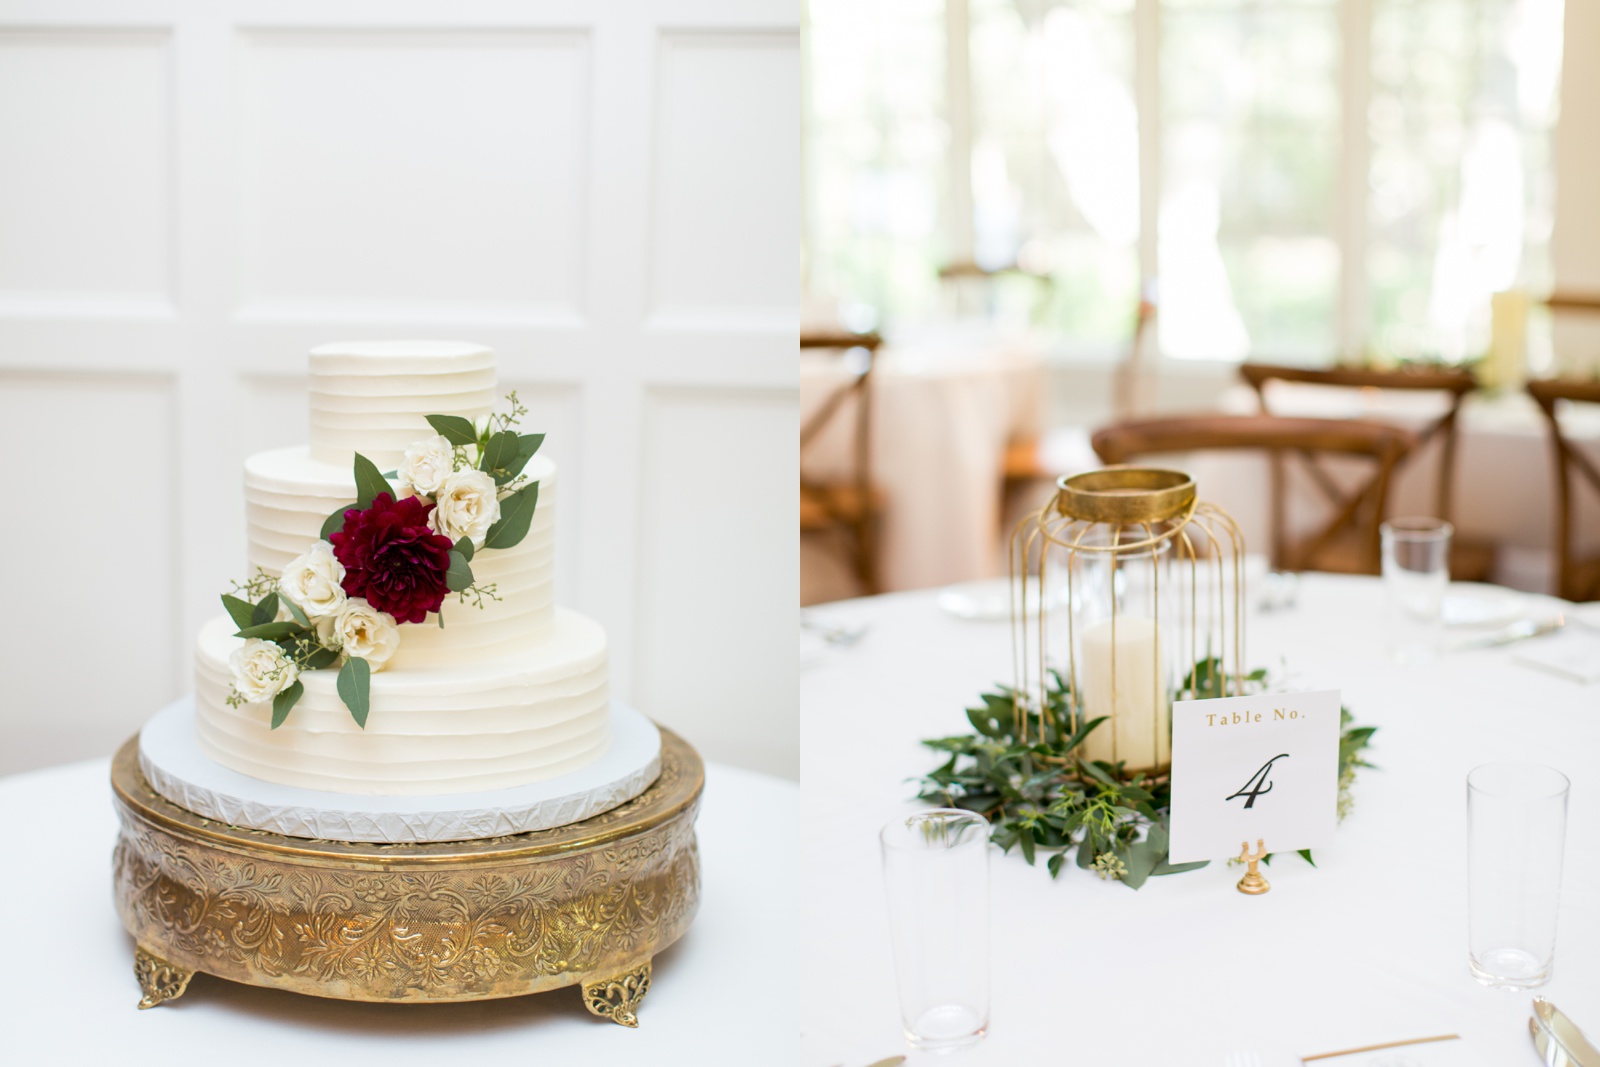 Film Reception details at an austin wedding. White, greenery, and cream wedding colors. Wedding cake with red, burgundy, and wine flowers